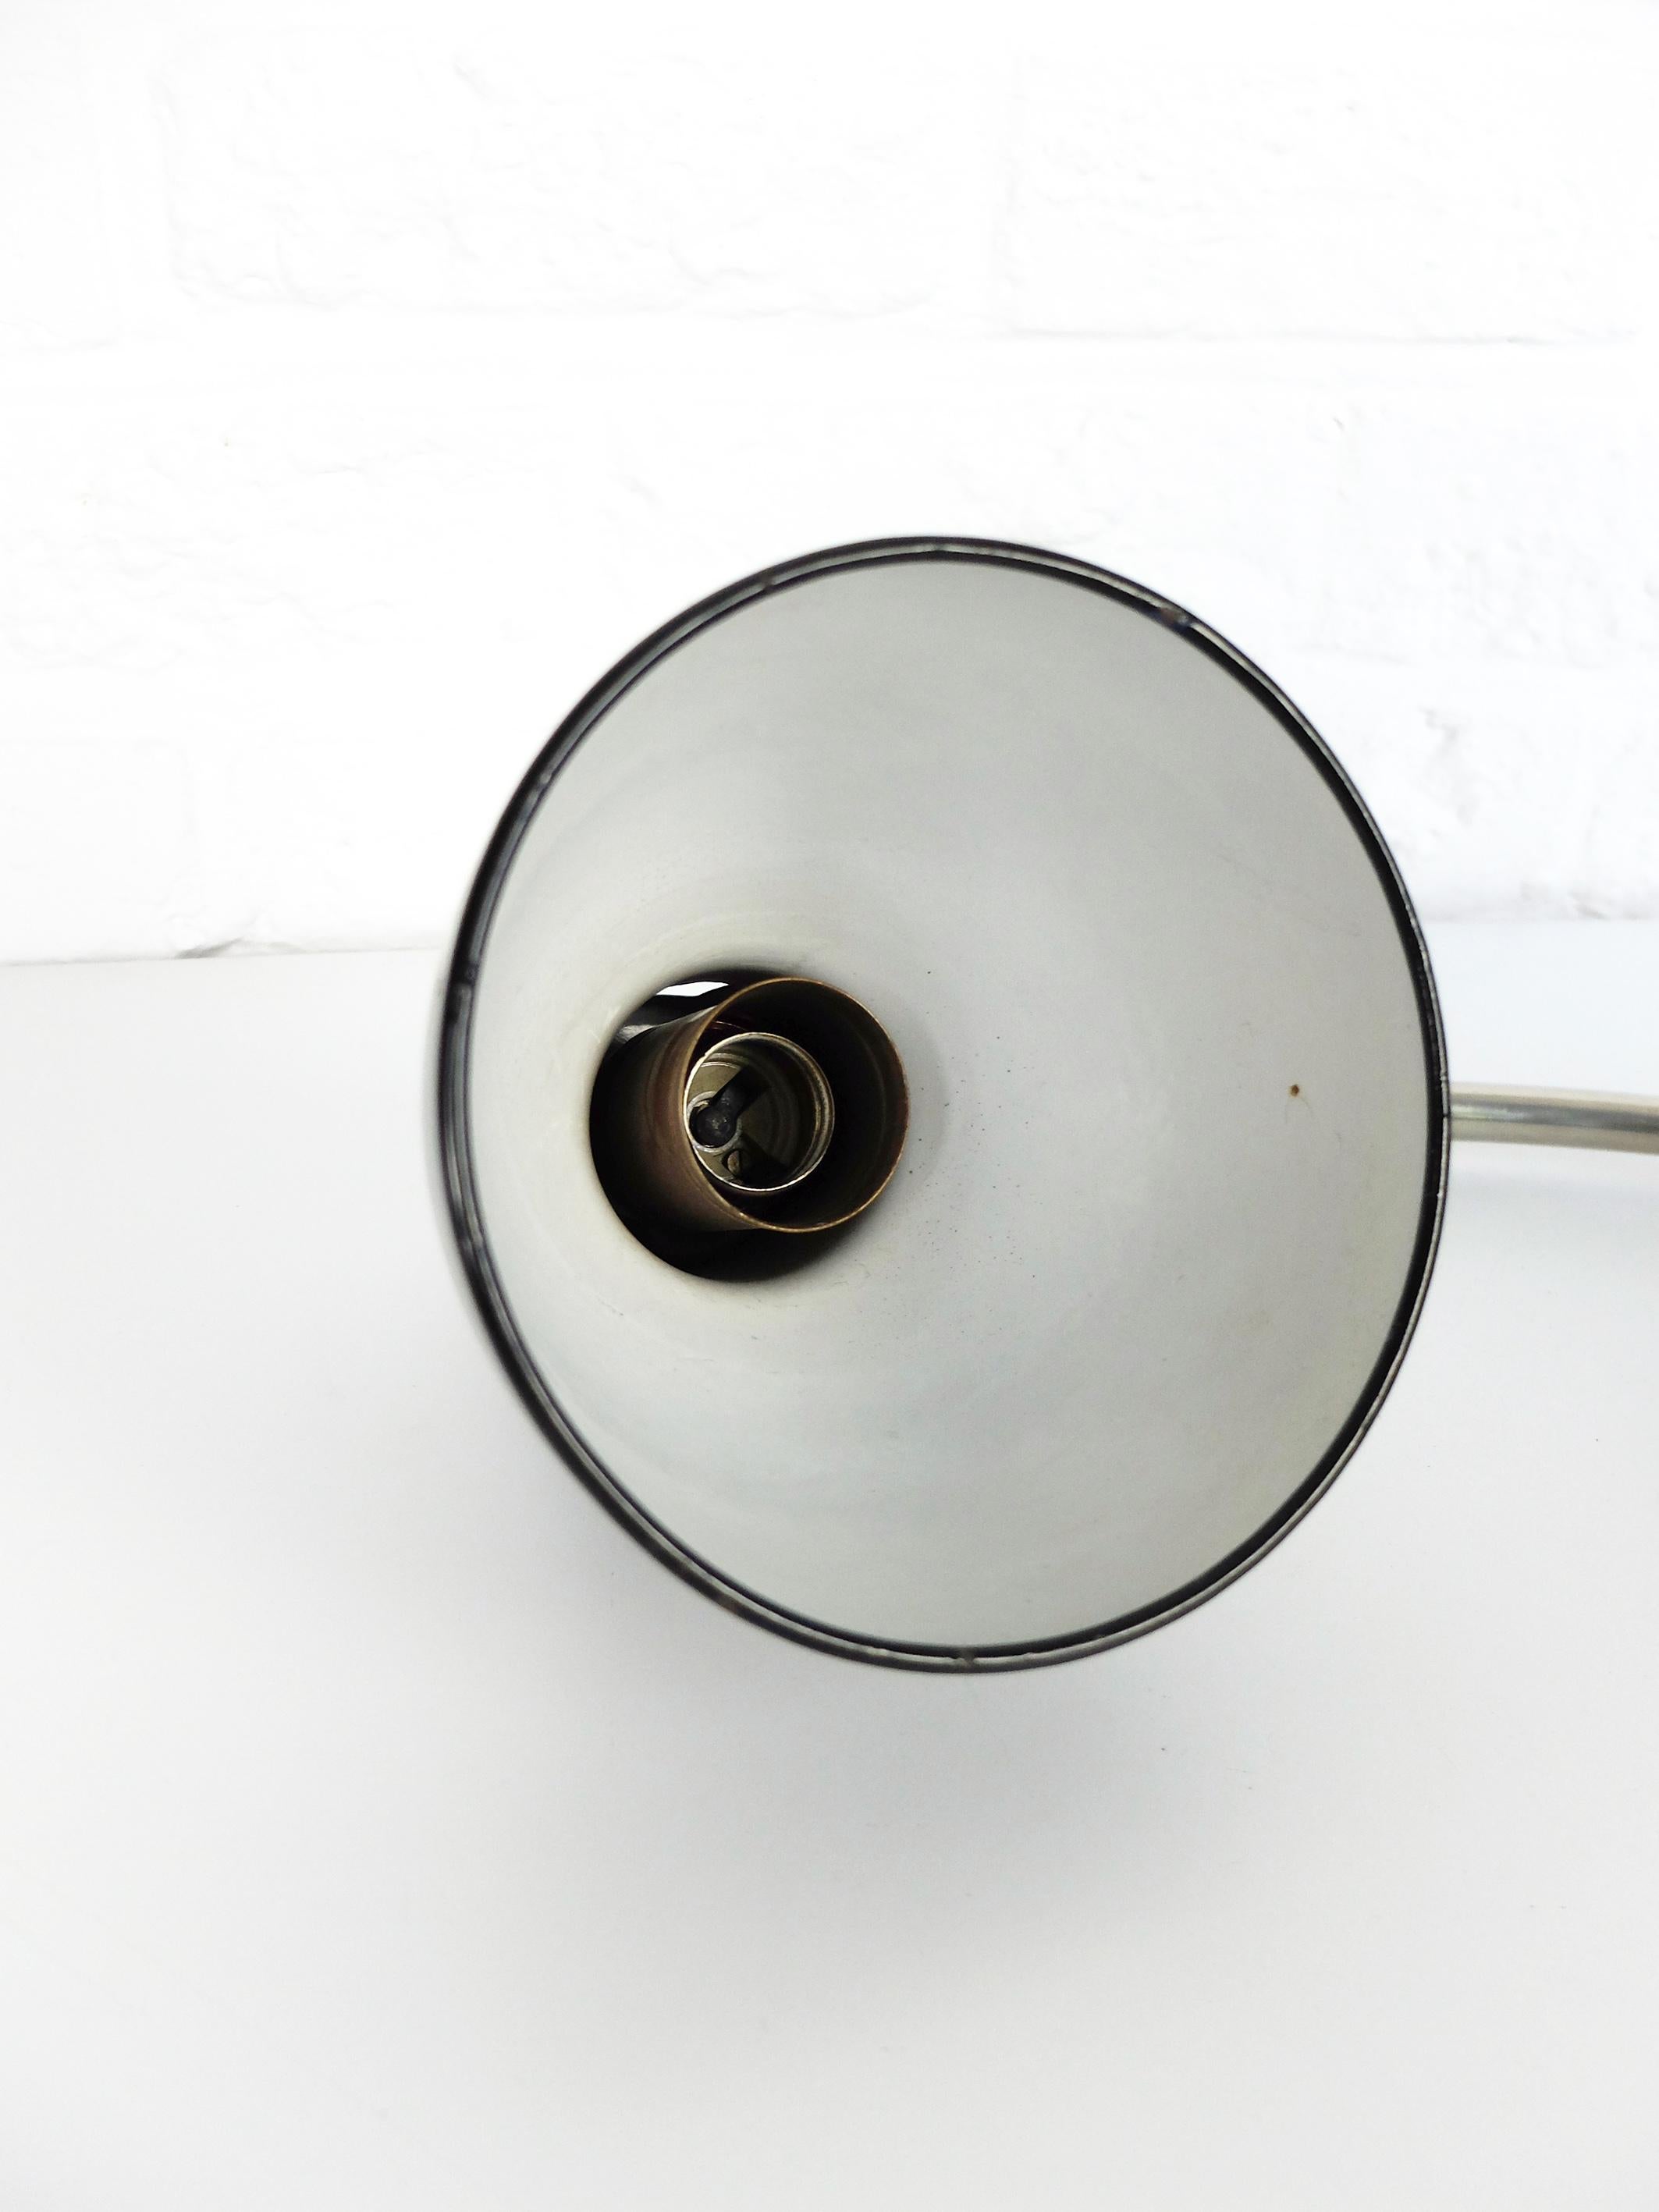 Bauhaus style Zirax table lamp by Schneider & Co, Germany, circa 1930s For Sale 5